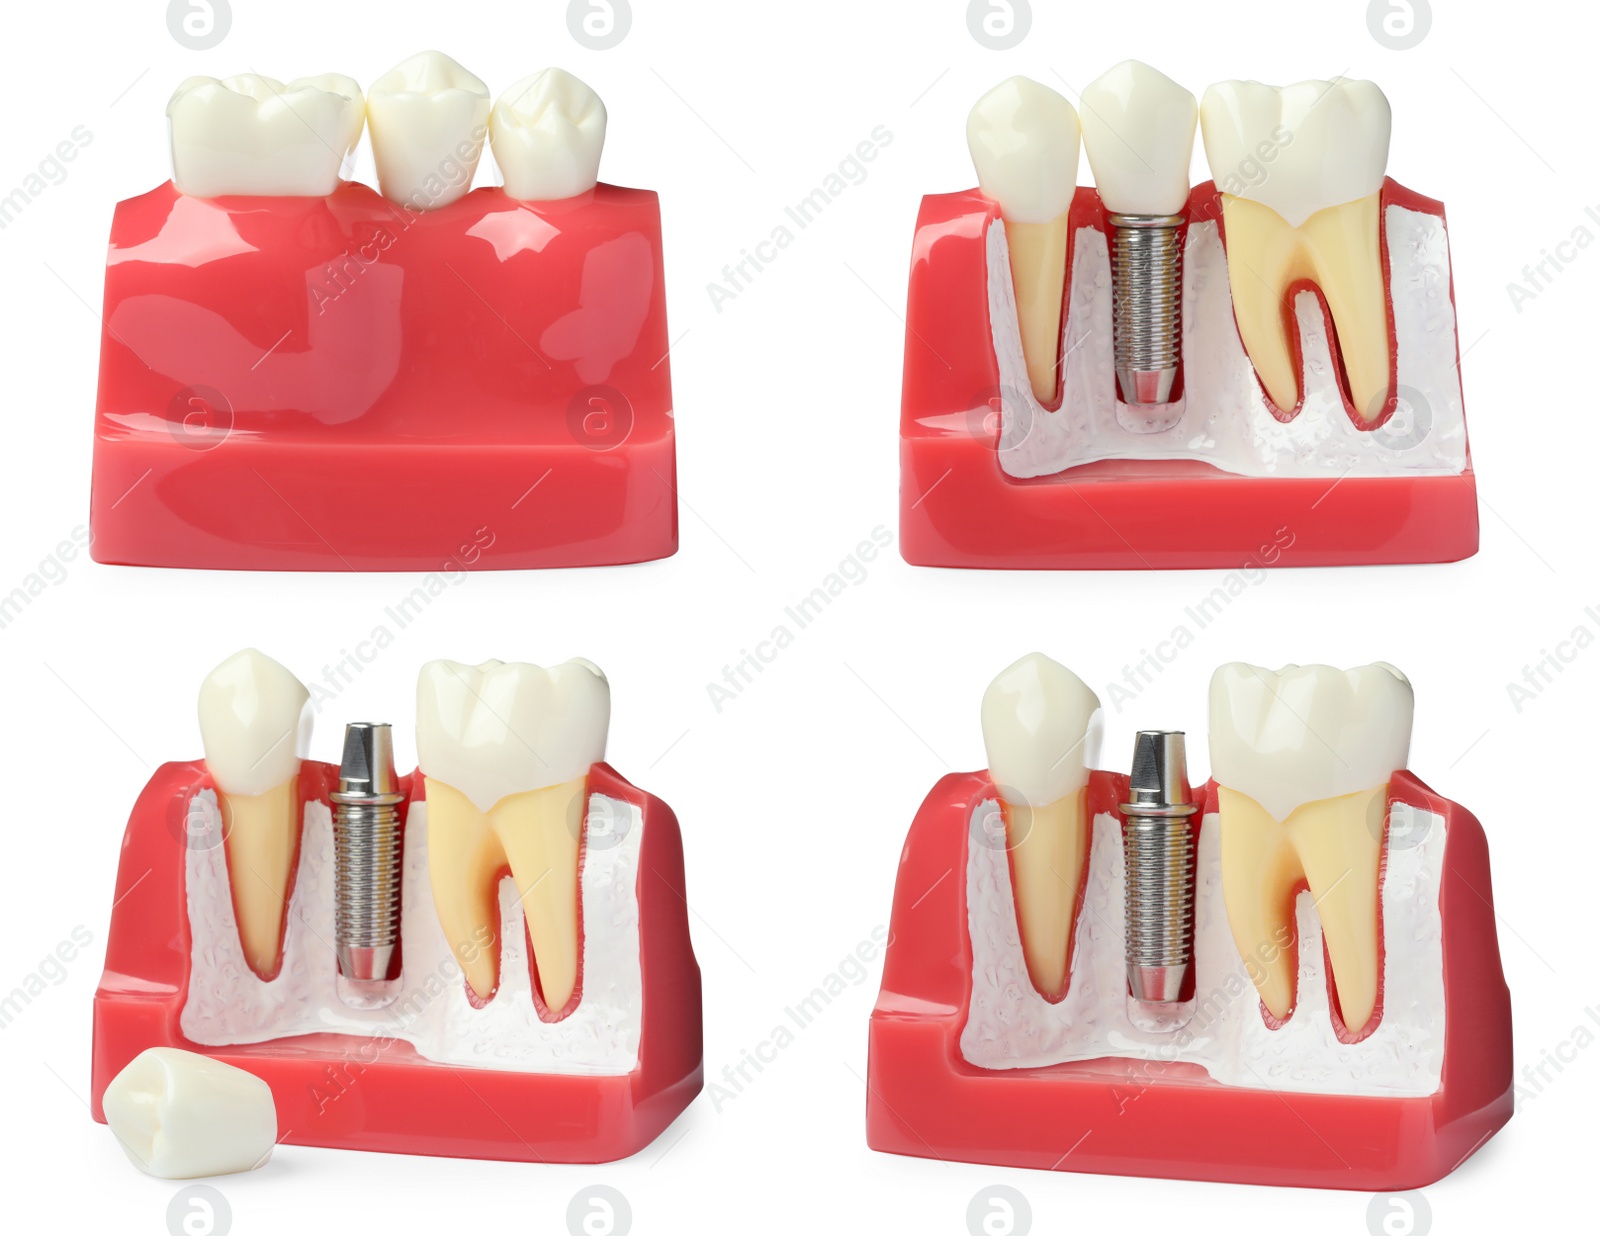 Image of Educational models of gum with dental implant between teeth on white background, collage